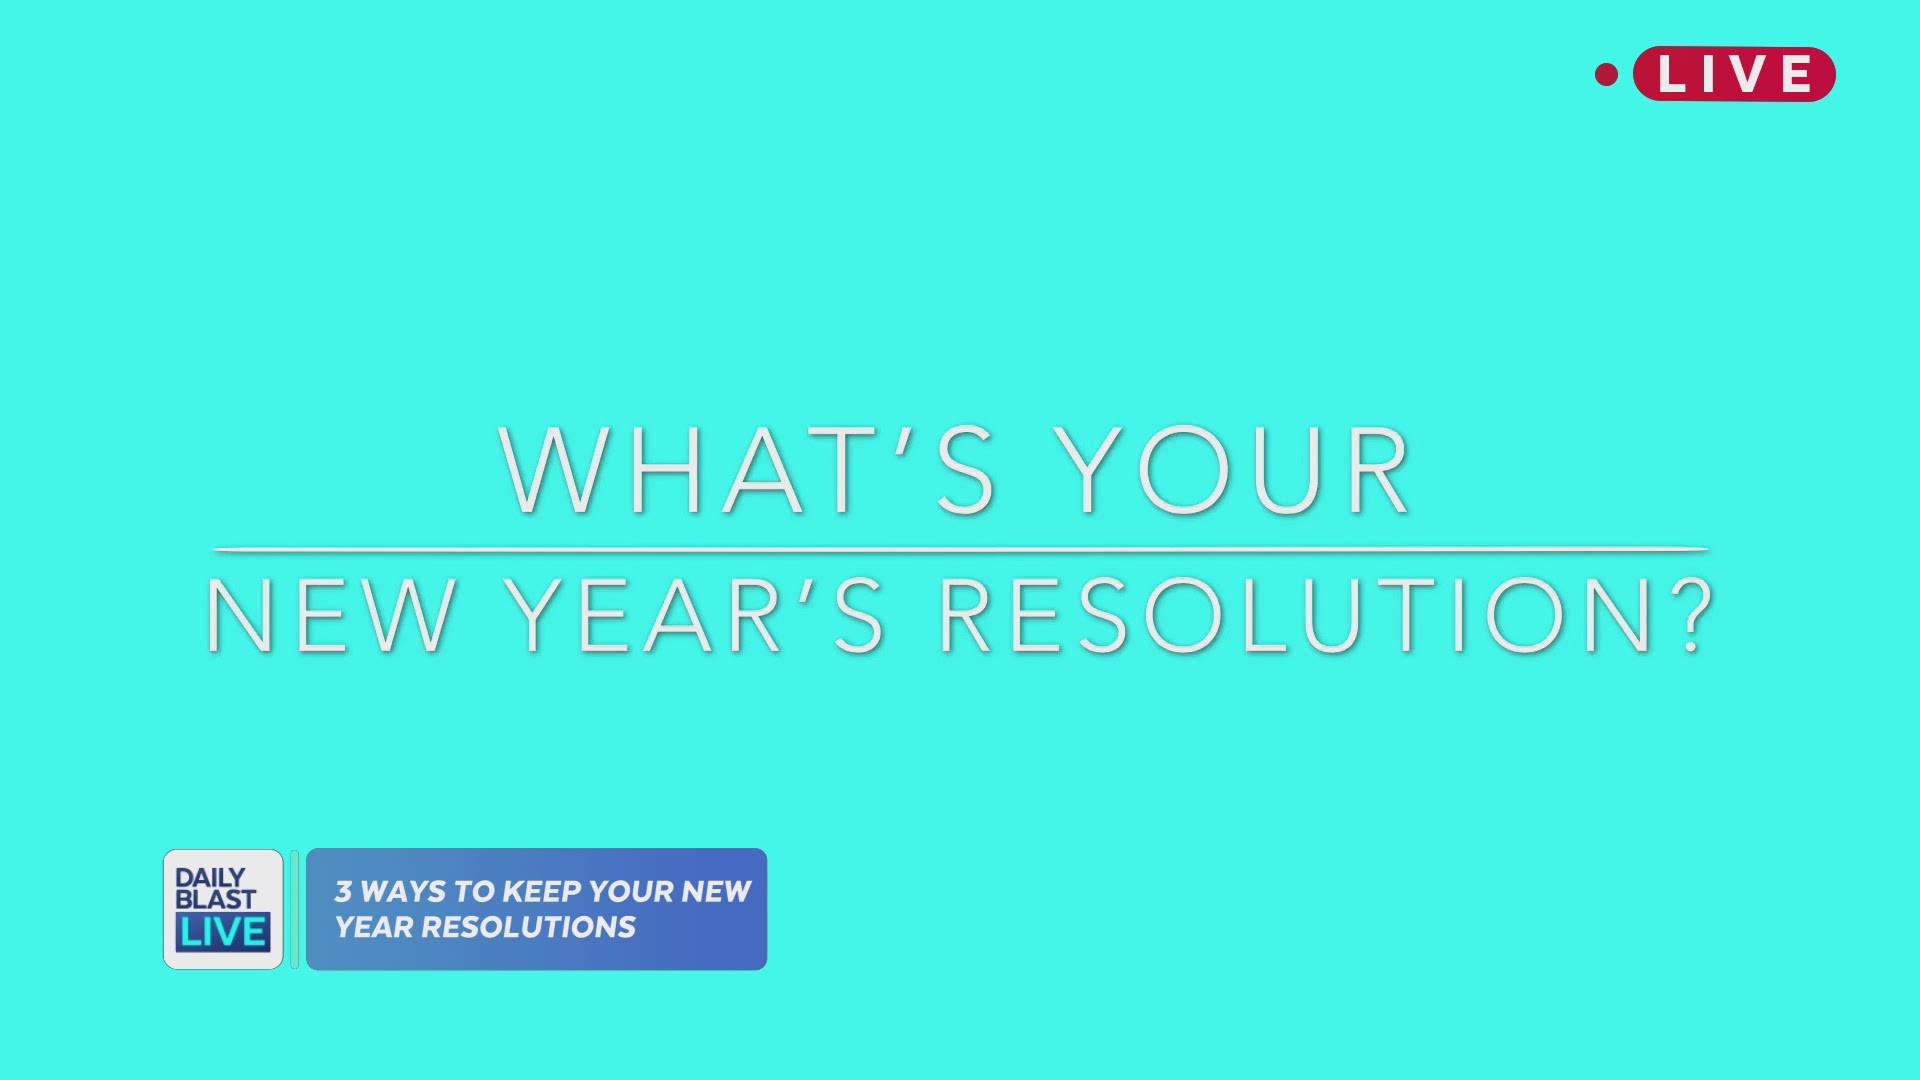 It's 2018 and Daily Blast LIVE is helping you kick start the new year! We have three easy ways for you to keep your New Year's resolutions. What is your New Year's resolution? 